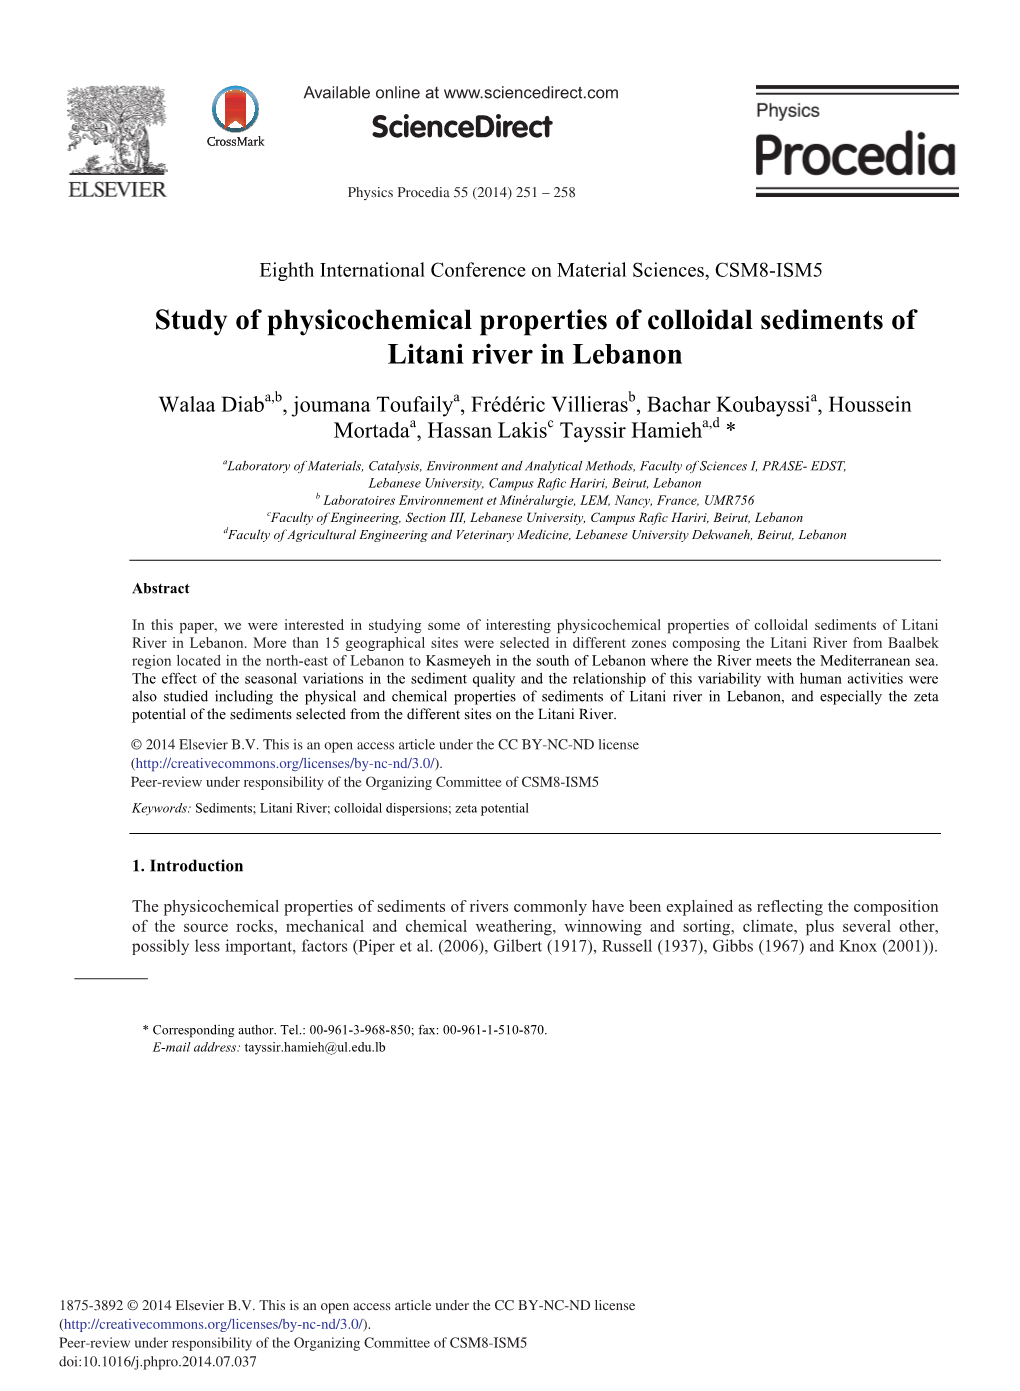 Study of Physicochemical Properties of Colloidal Sediments of Litani River in Lebanon